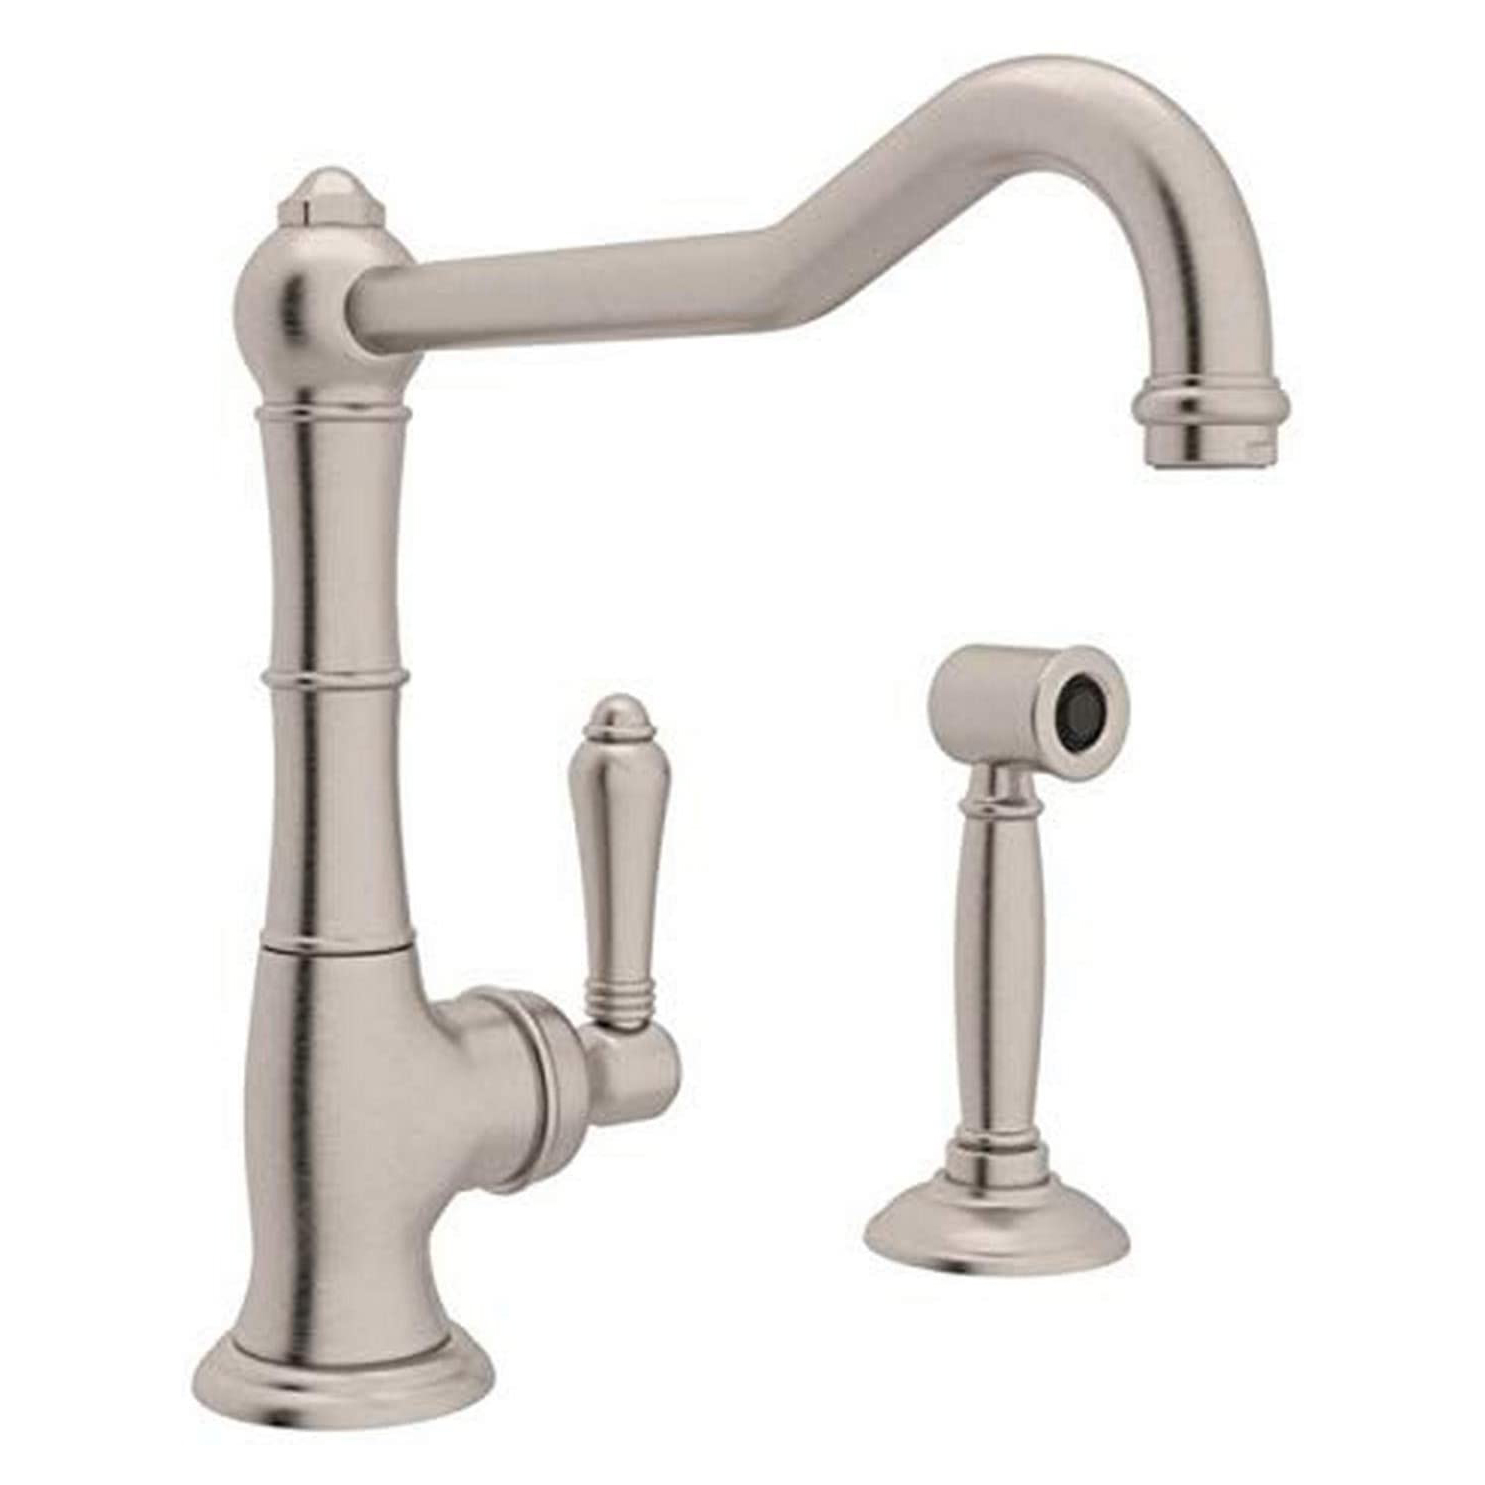 Cinquanta Kitchen Faucet w/Sidespray in Satin Nickel w/Metal Levers